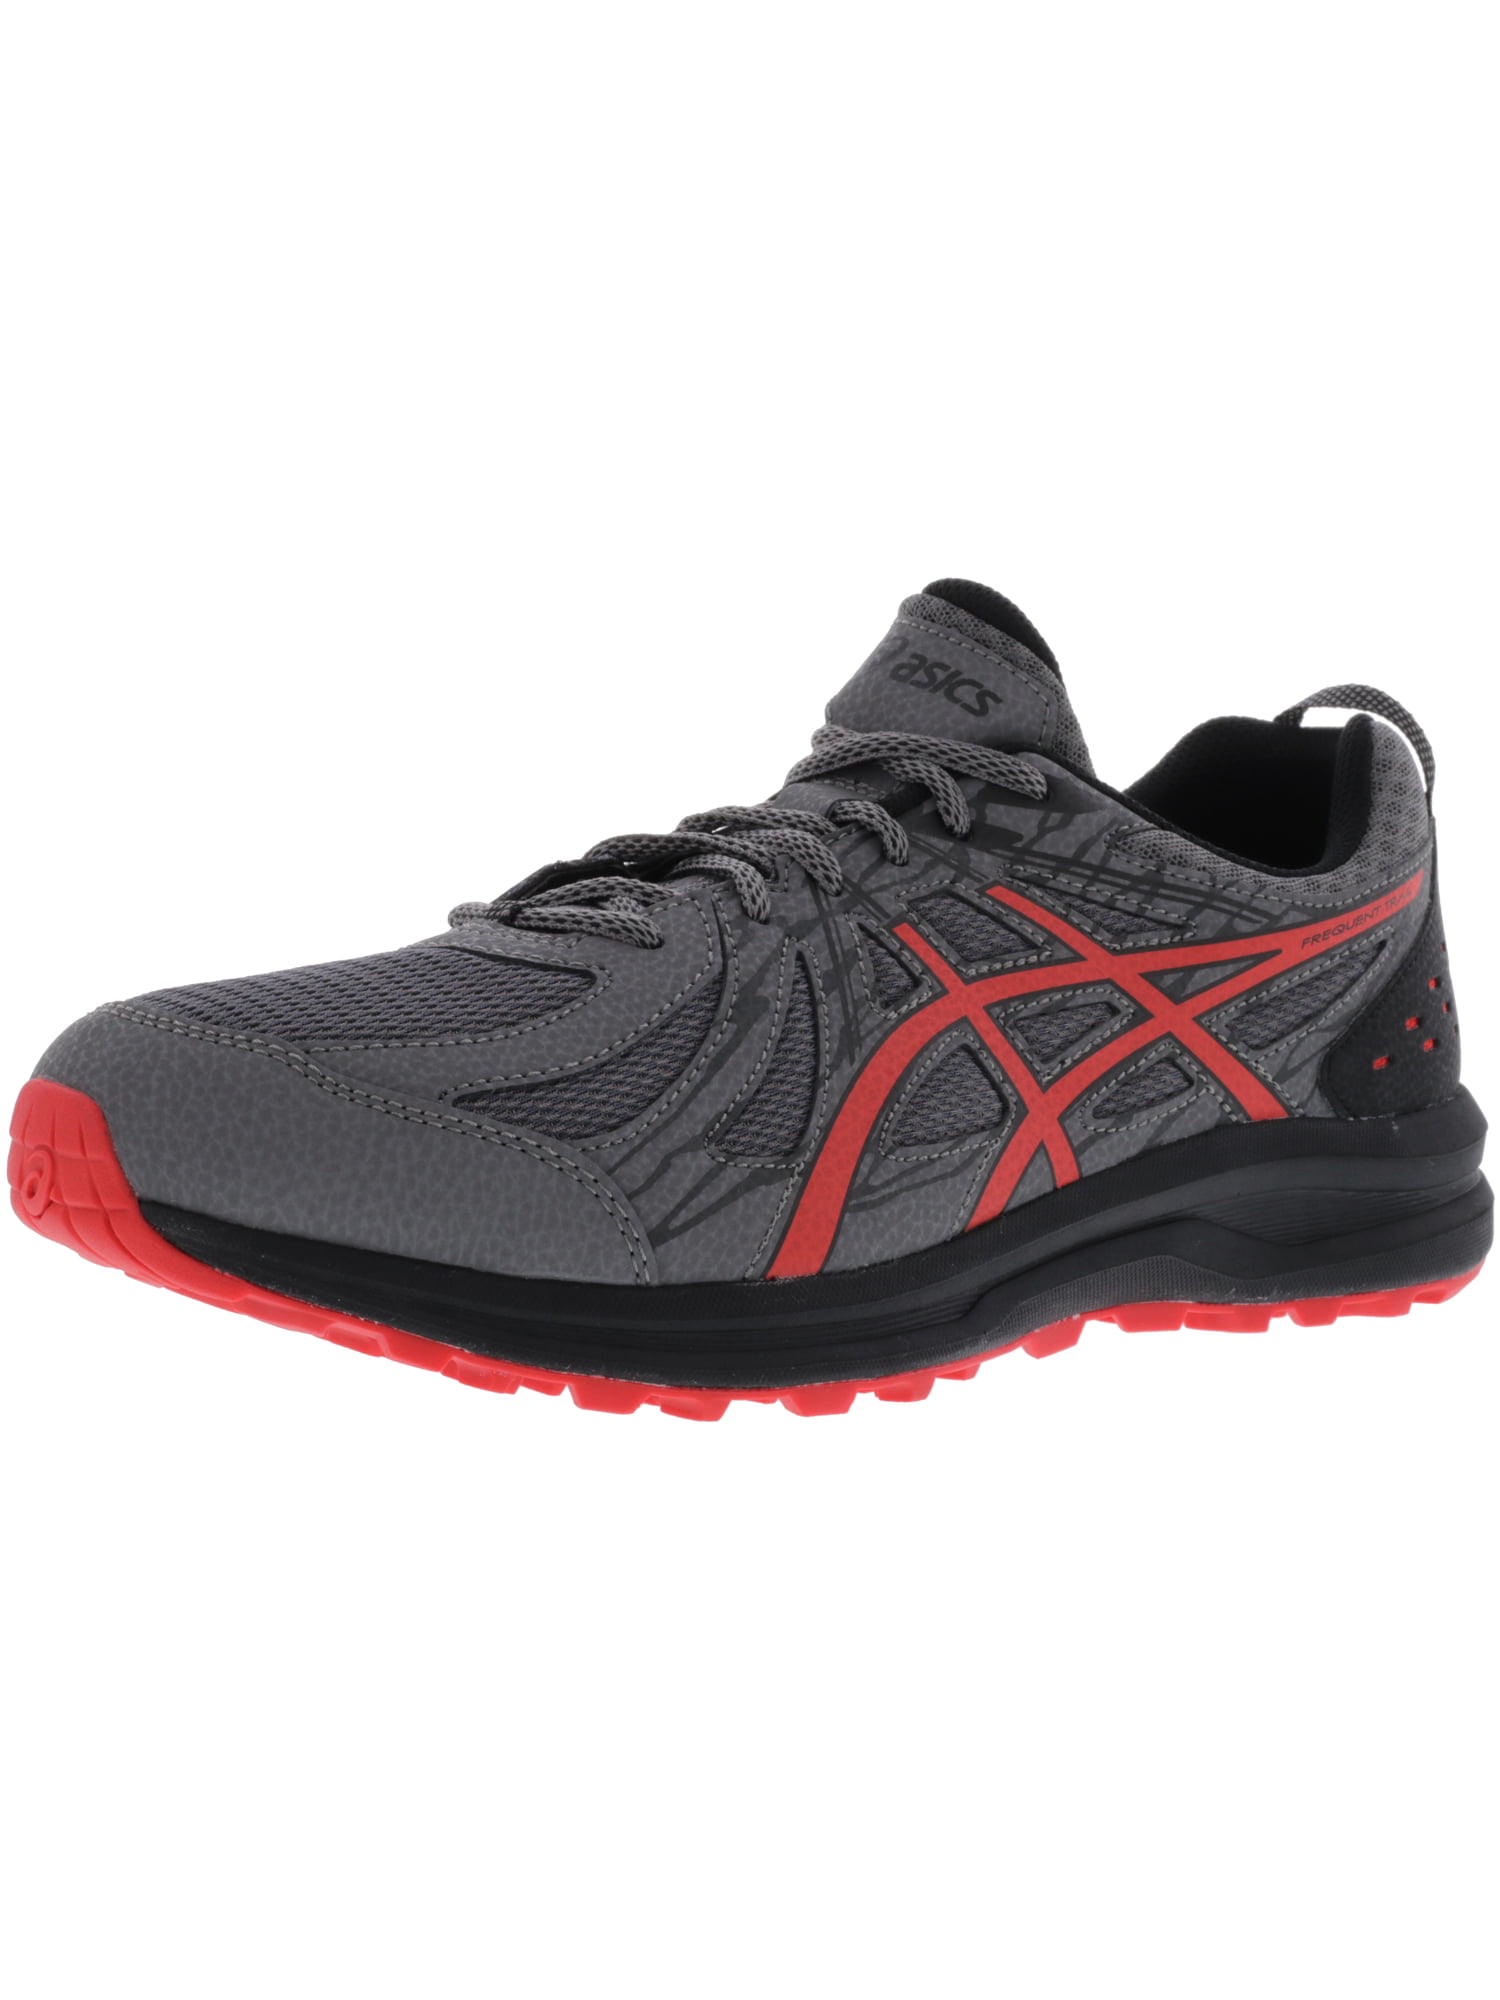 asics frequent trail